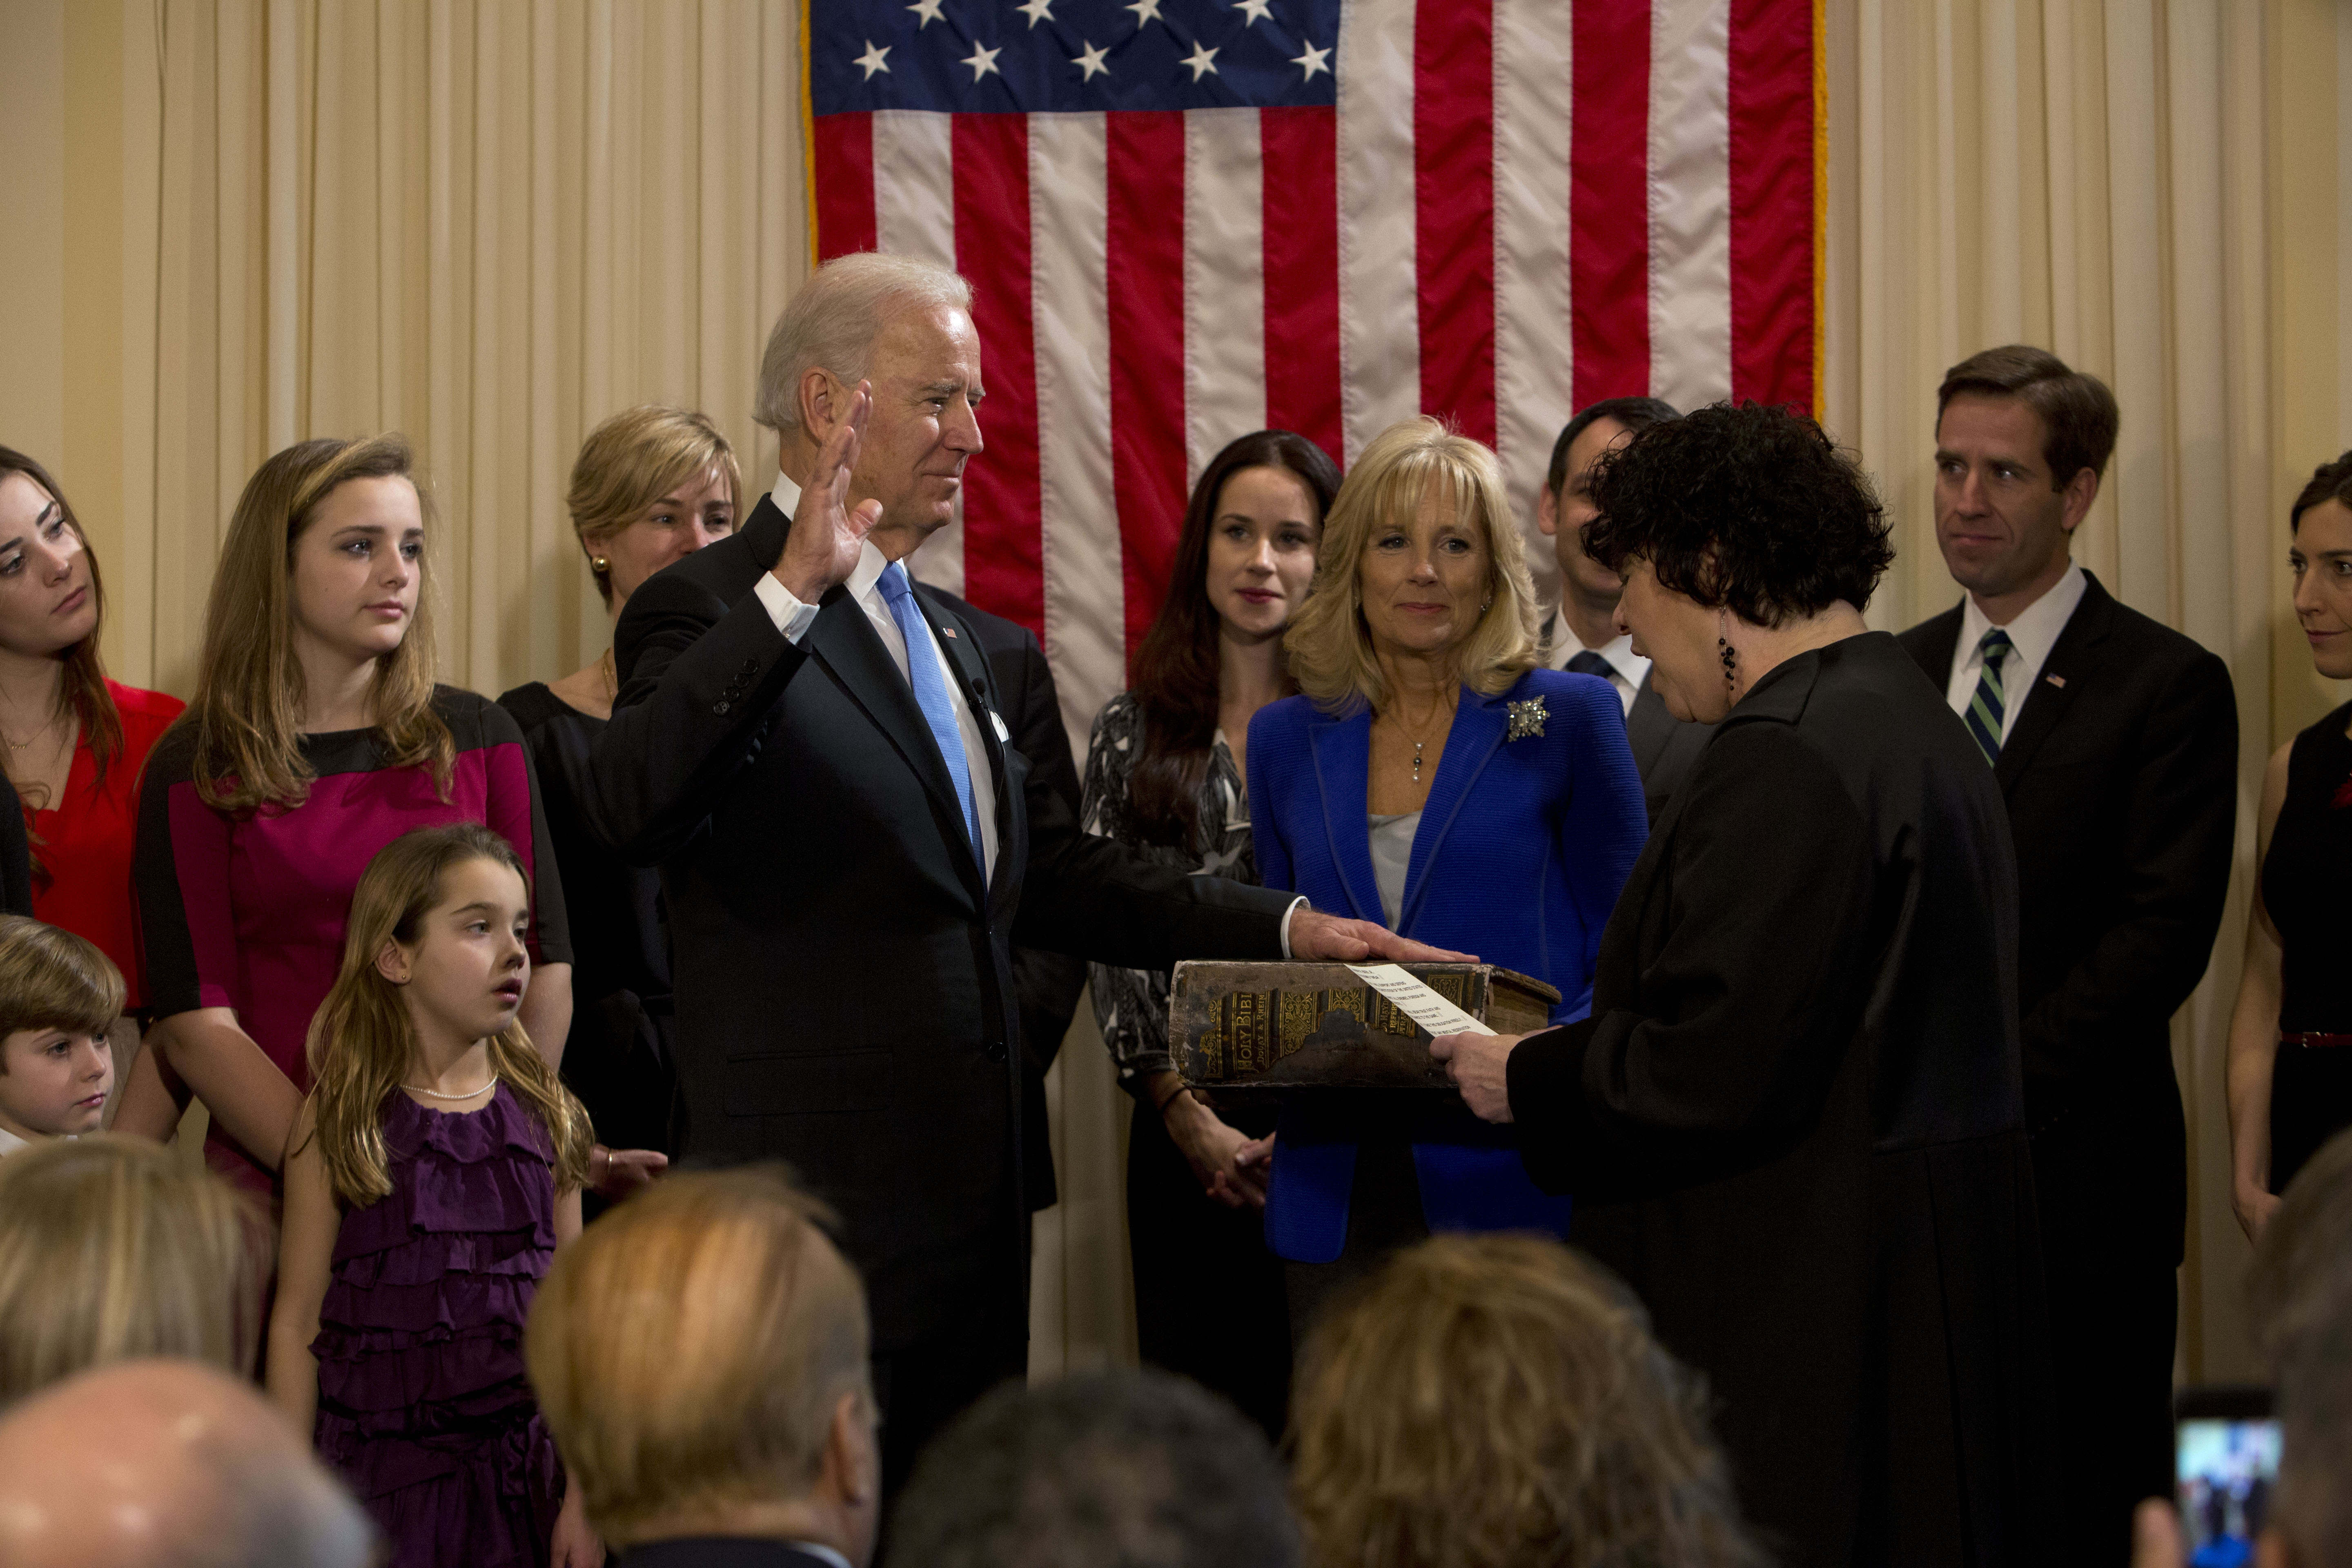 Supreme Court Justice Sonya Sotomayor administers the oath of office to Vice President Joe Biden